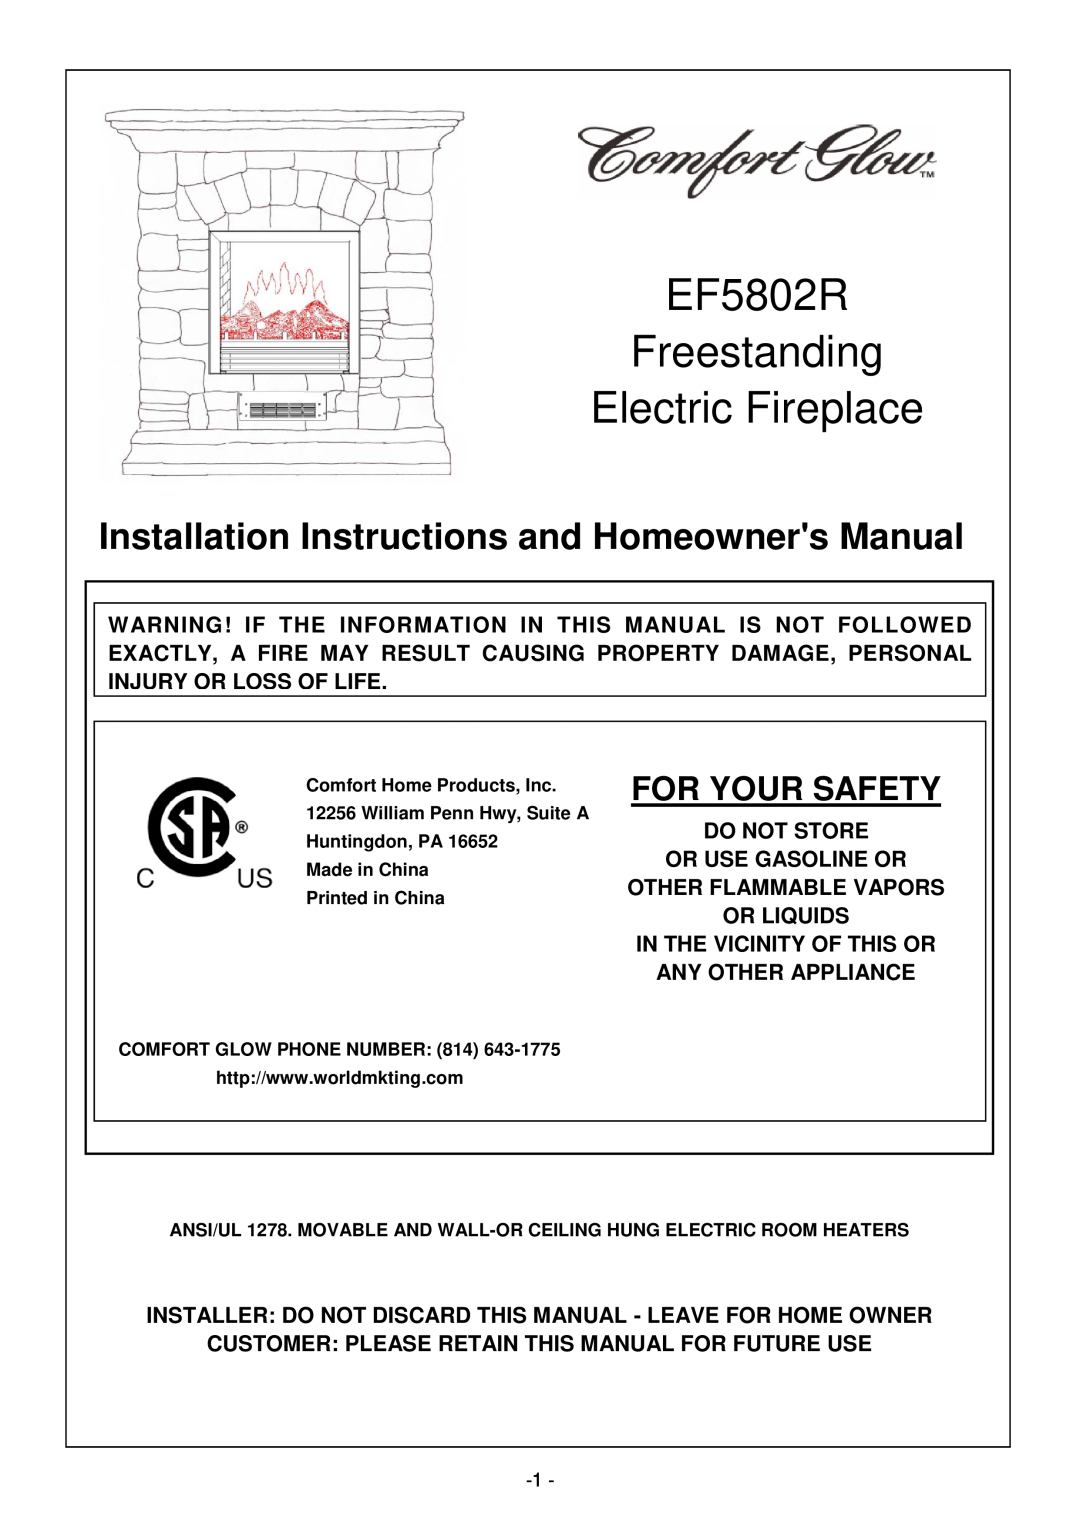 Desa Tech installation instructions For Your Safety, EF5802R Freestanding Electric Fireplace 